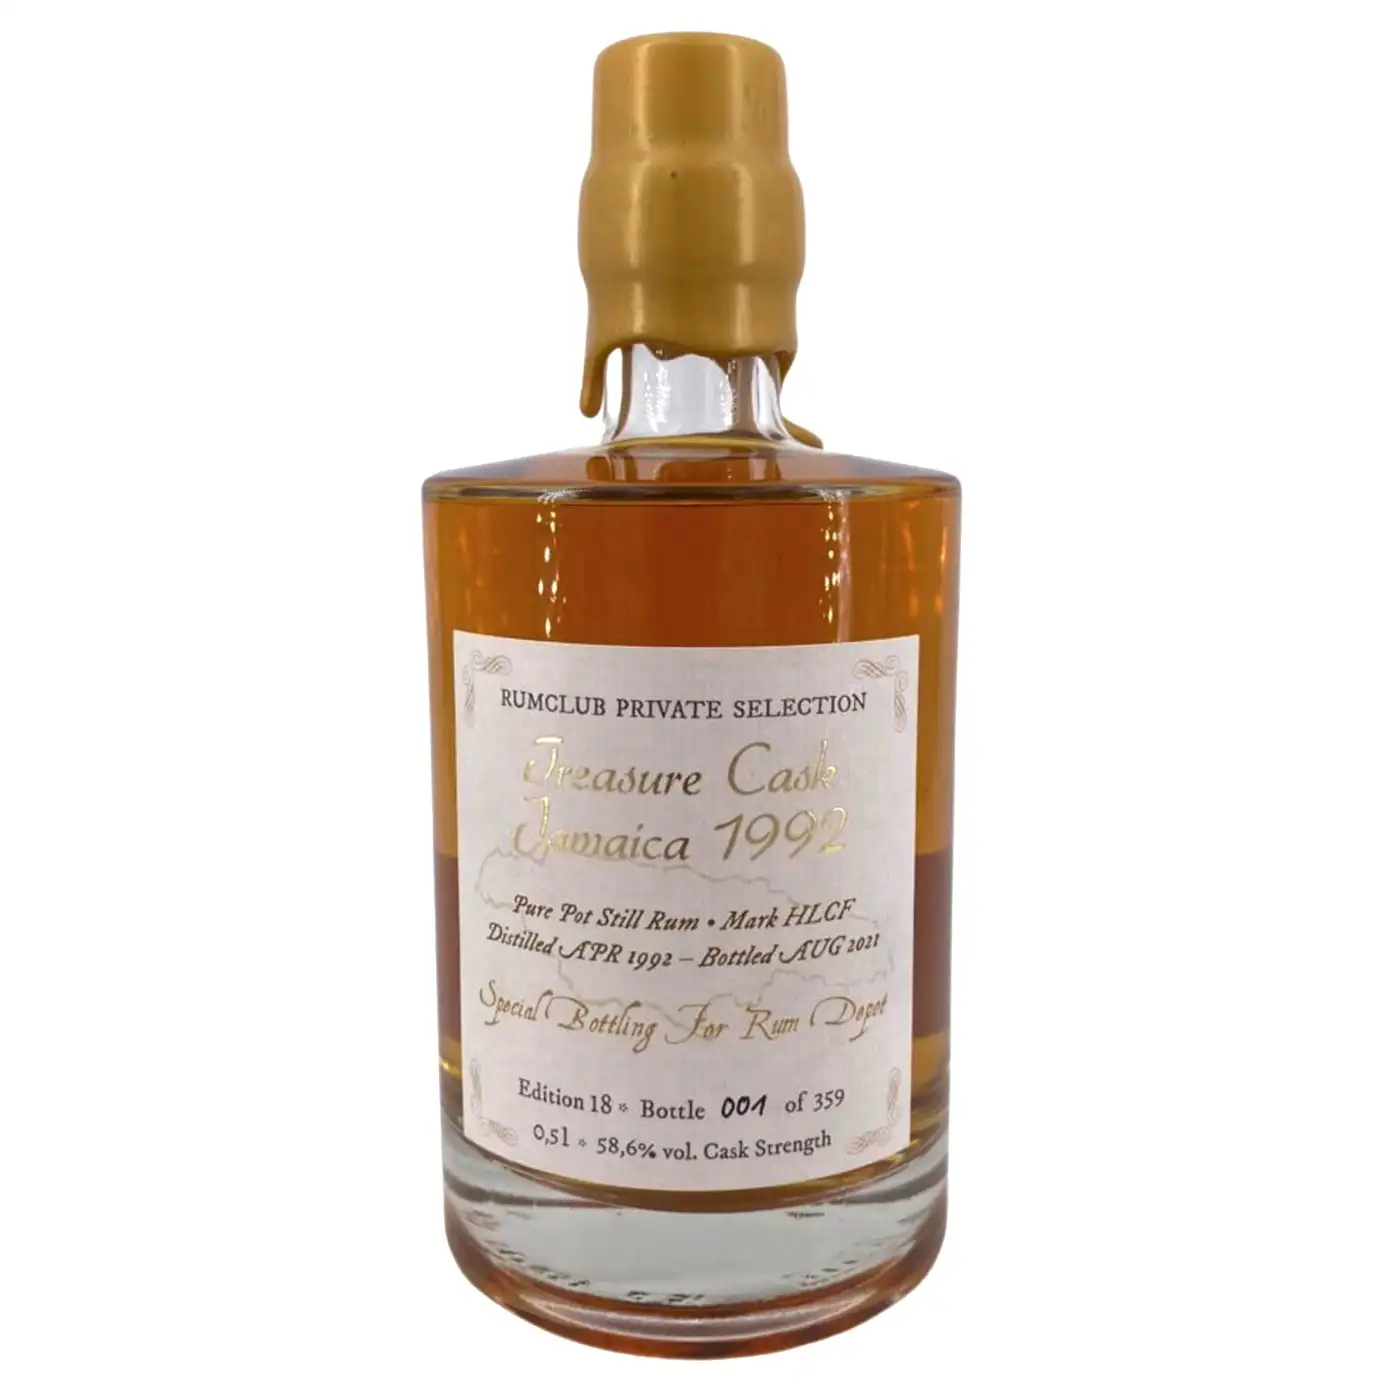 Image of the front of the bottle of the rum Rumclub Private Selection Ed. 18 Treasure Cask Jamaica HLCF